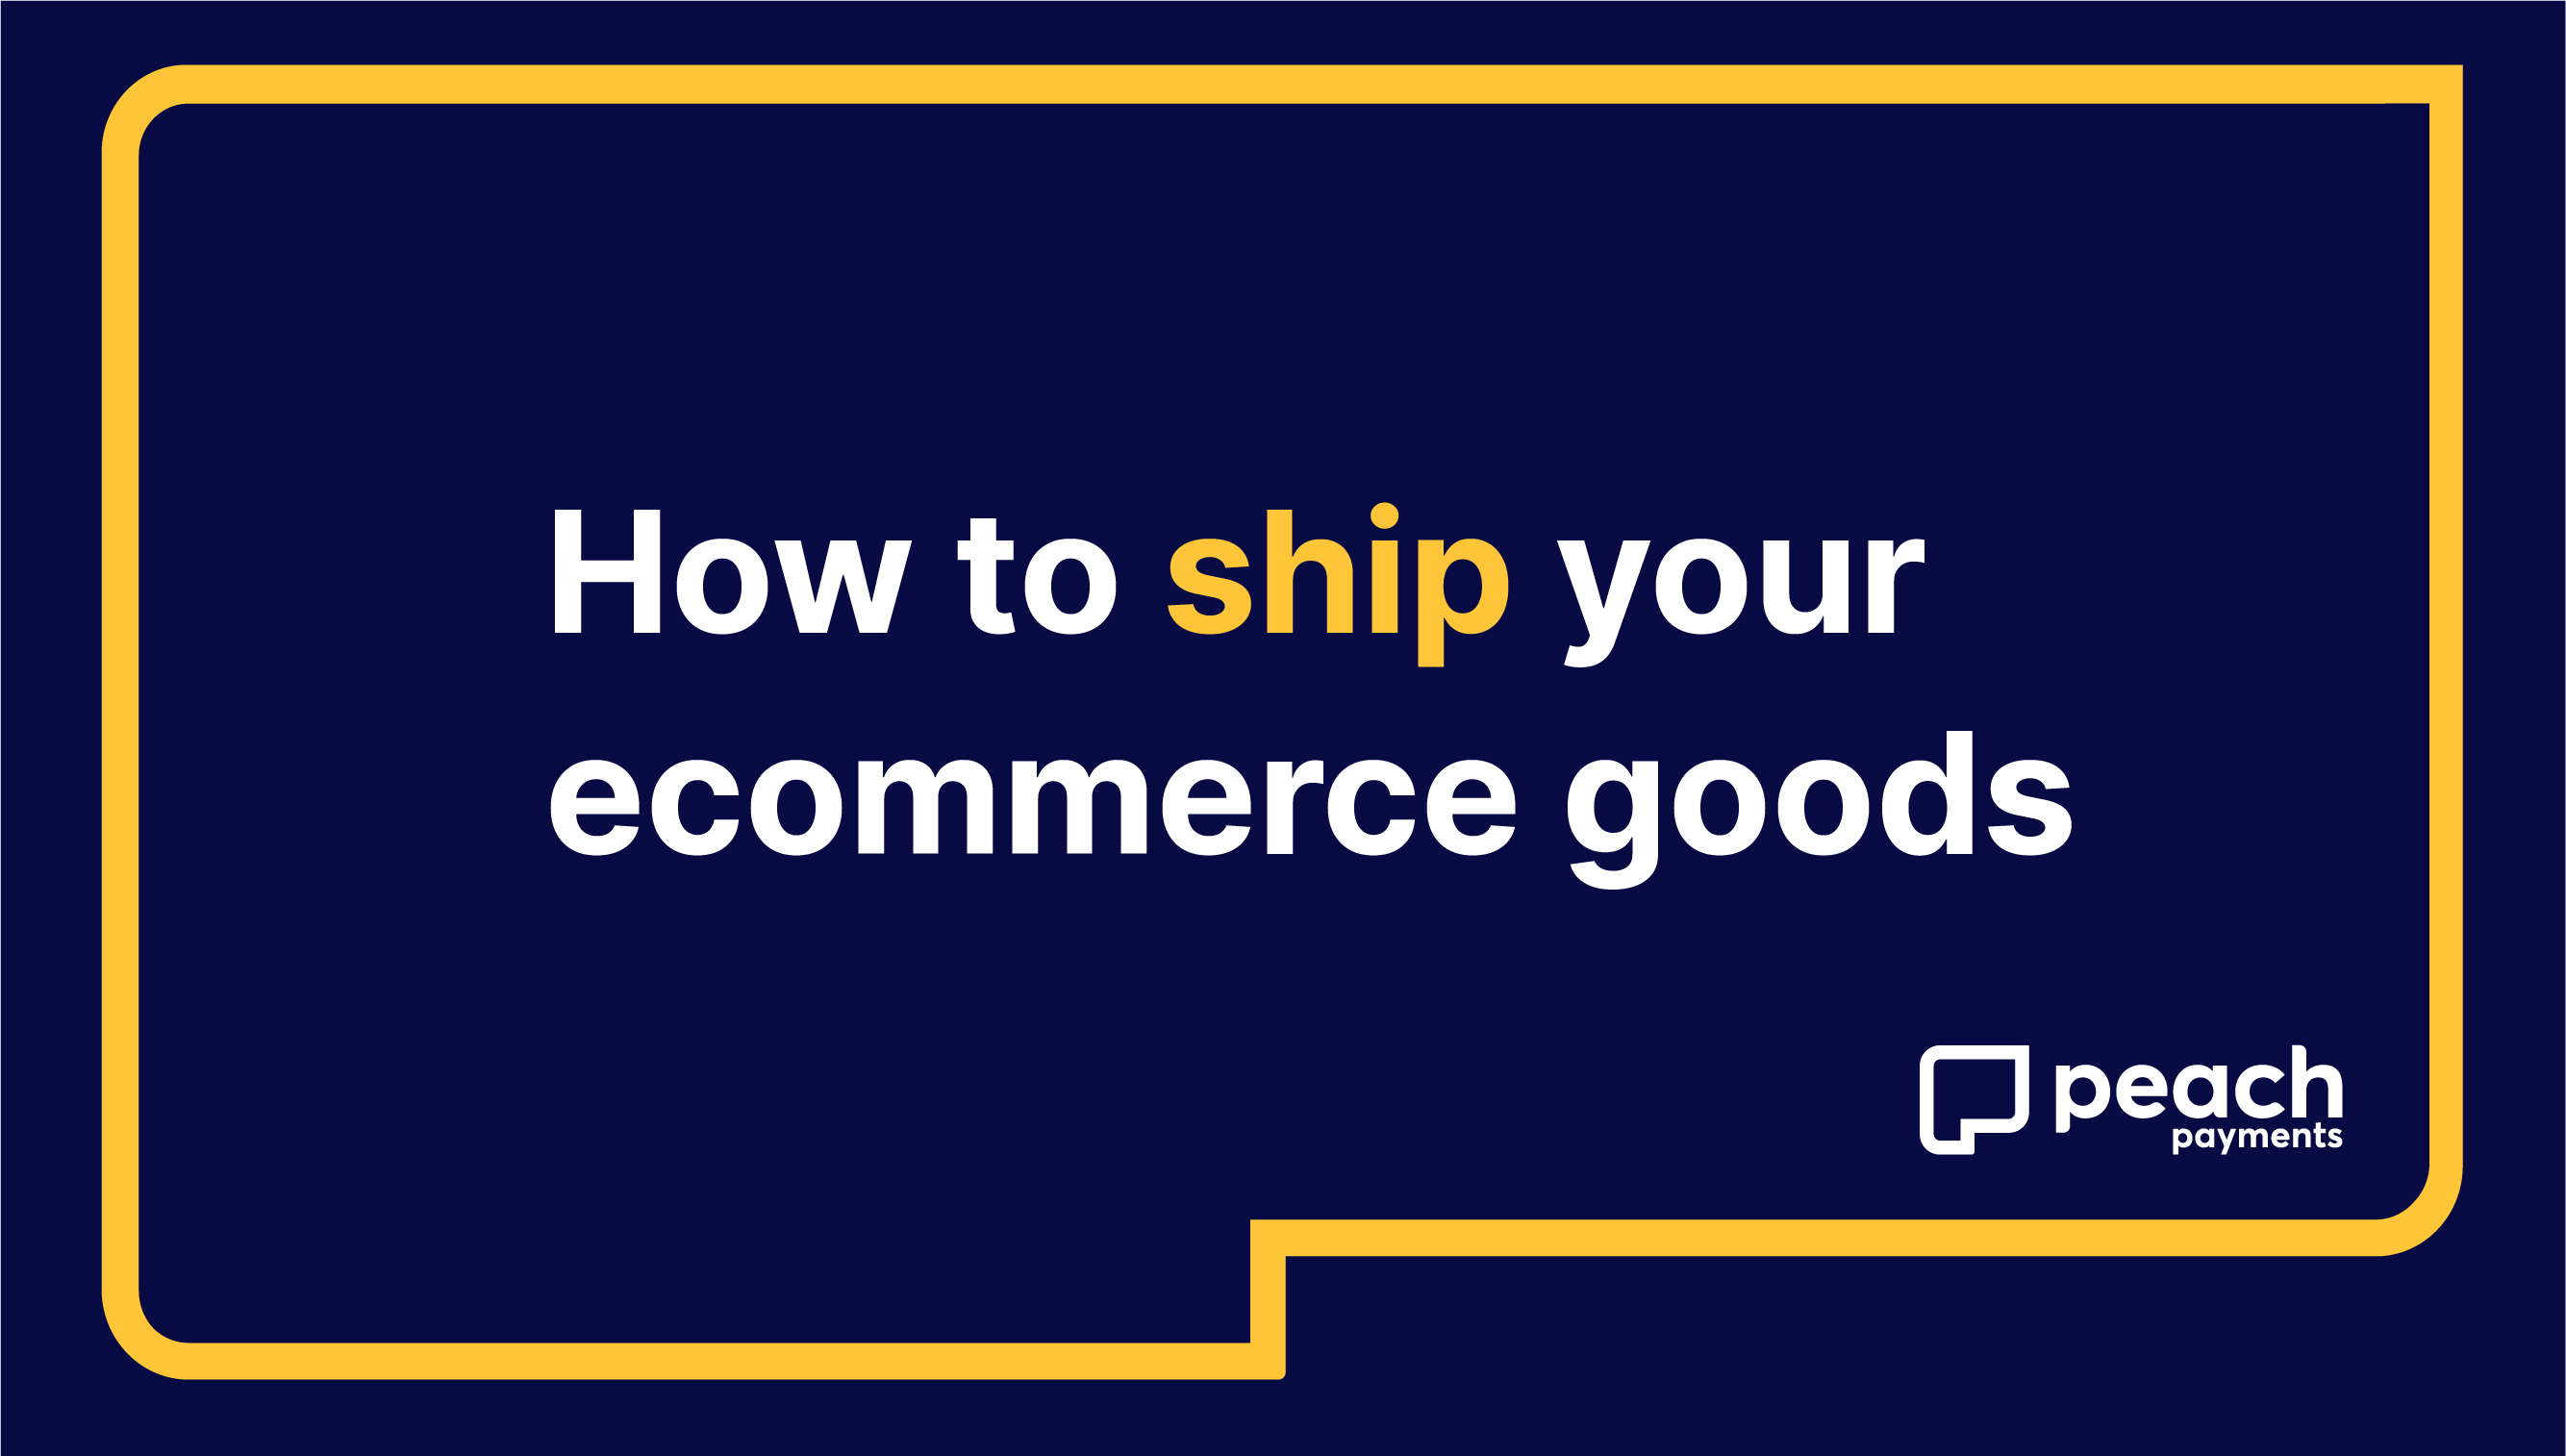 How to ship your ecommerce goods